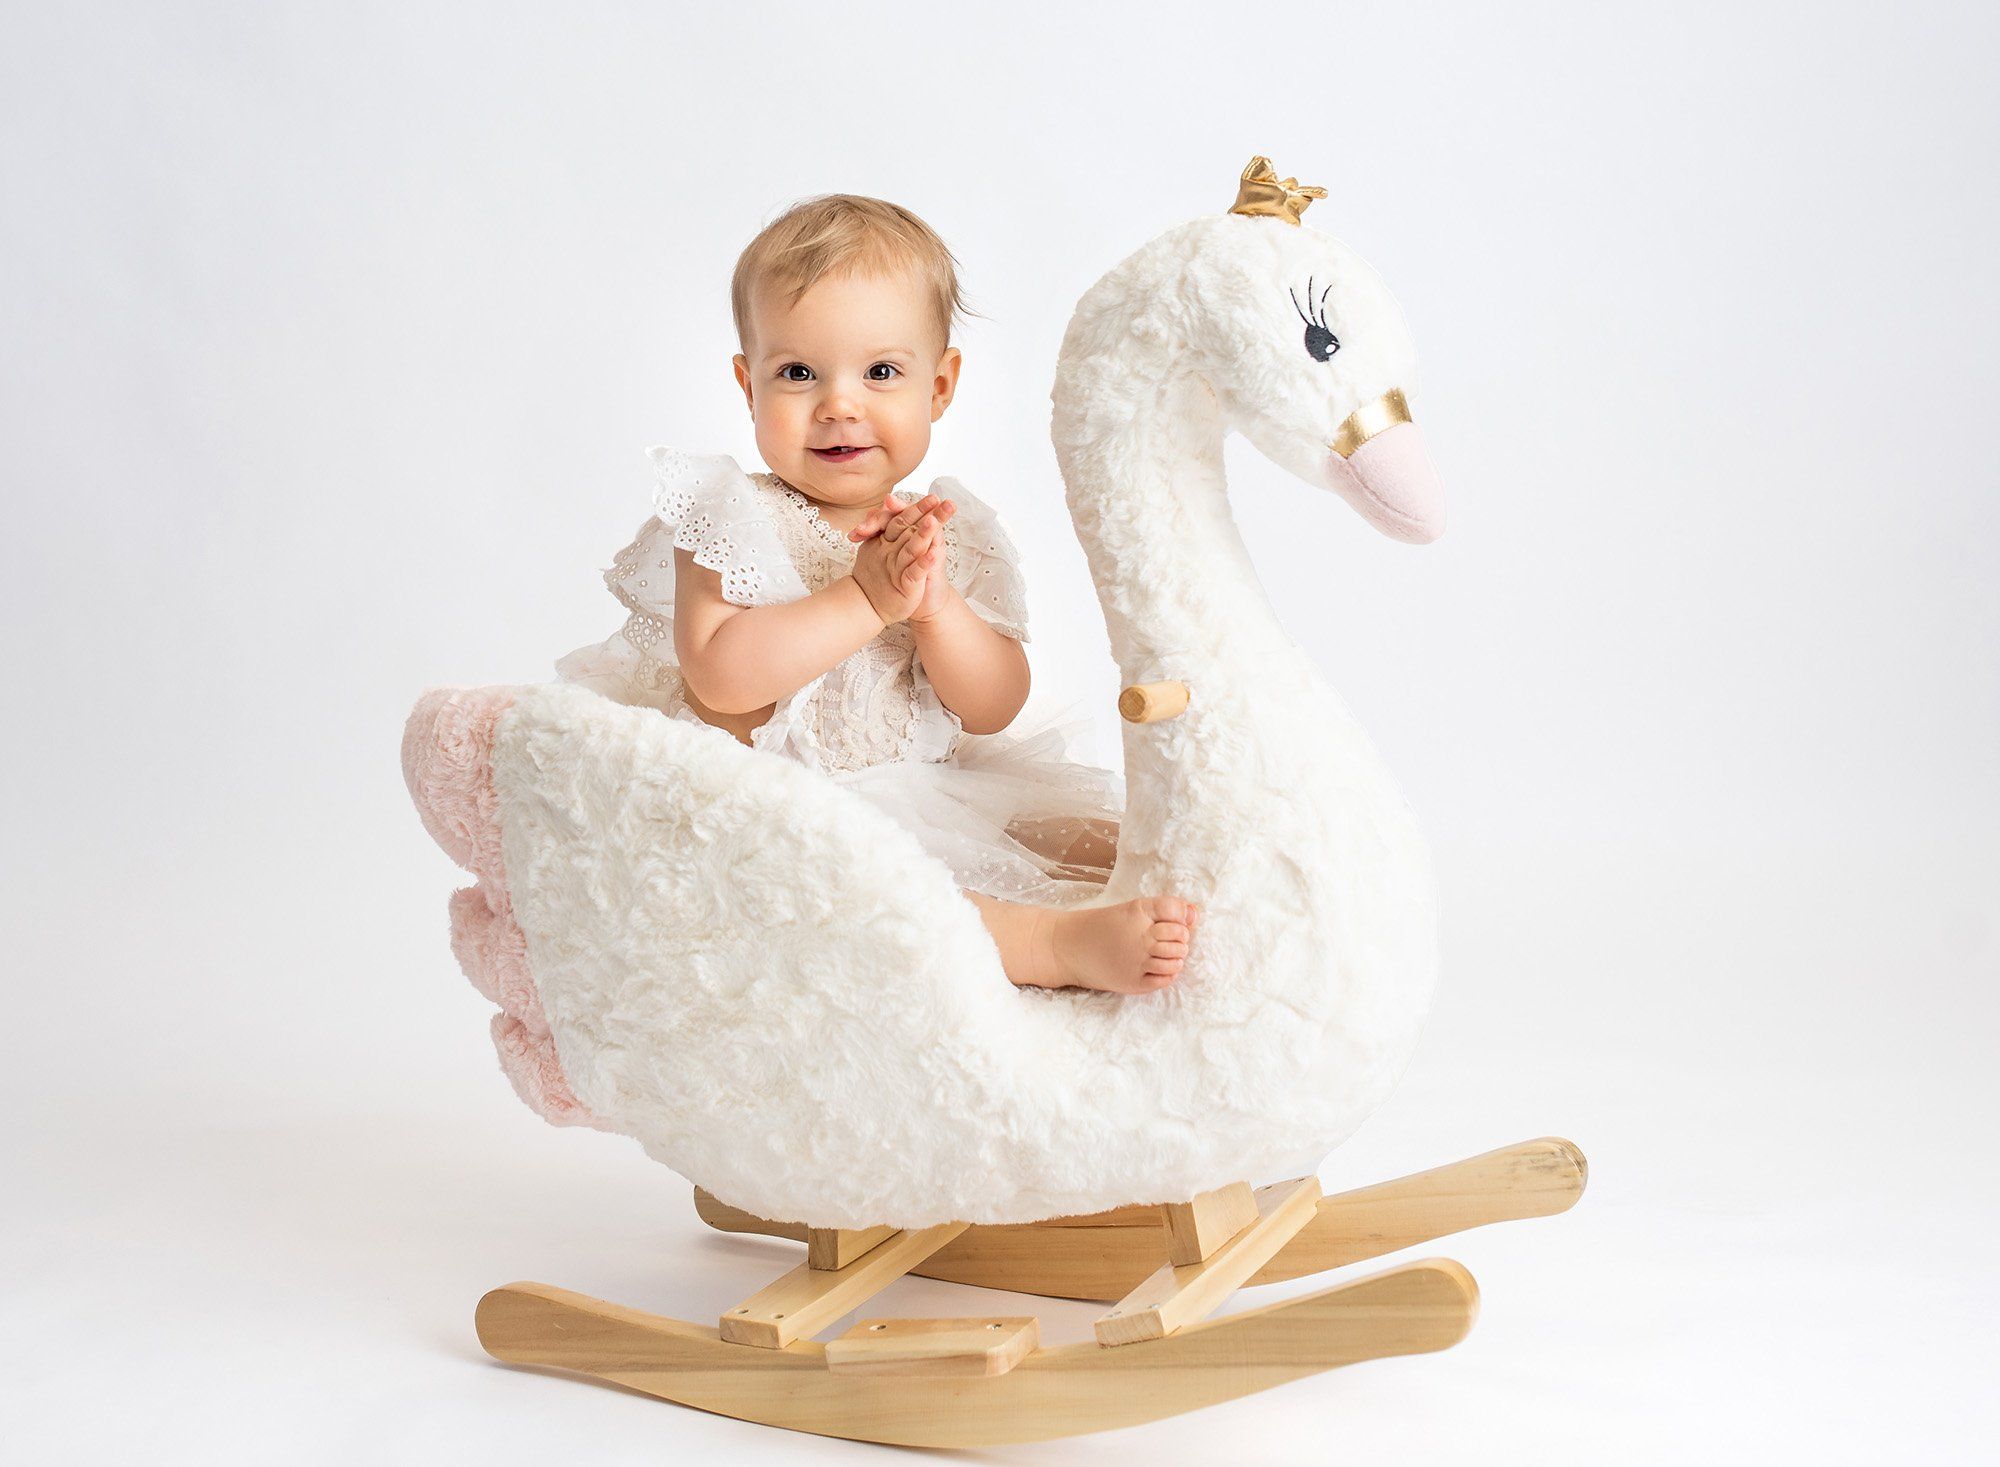 one year old girl wearing white lace dress sitting on swan rocker with white backdrop